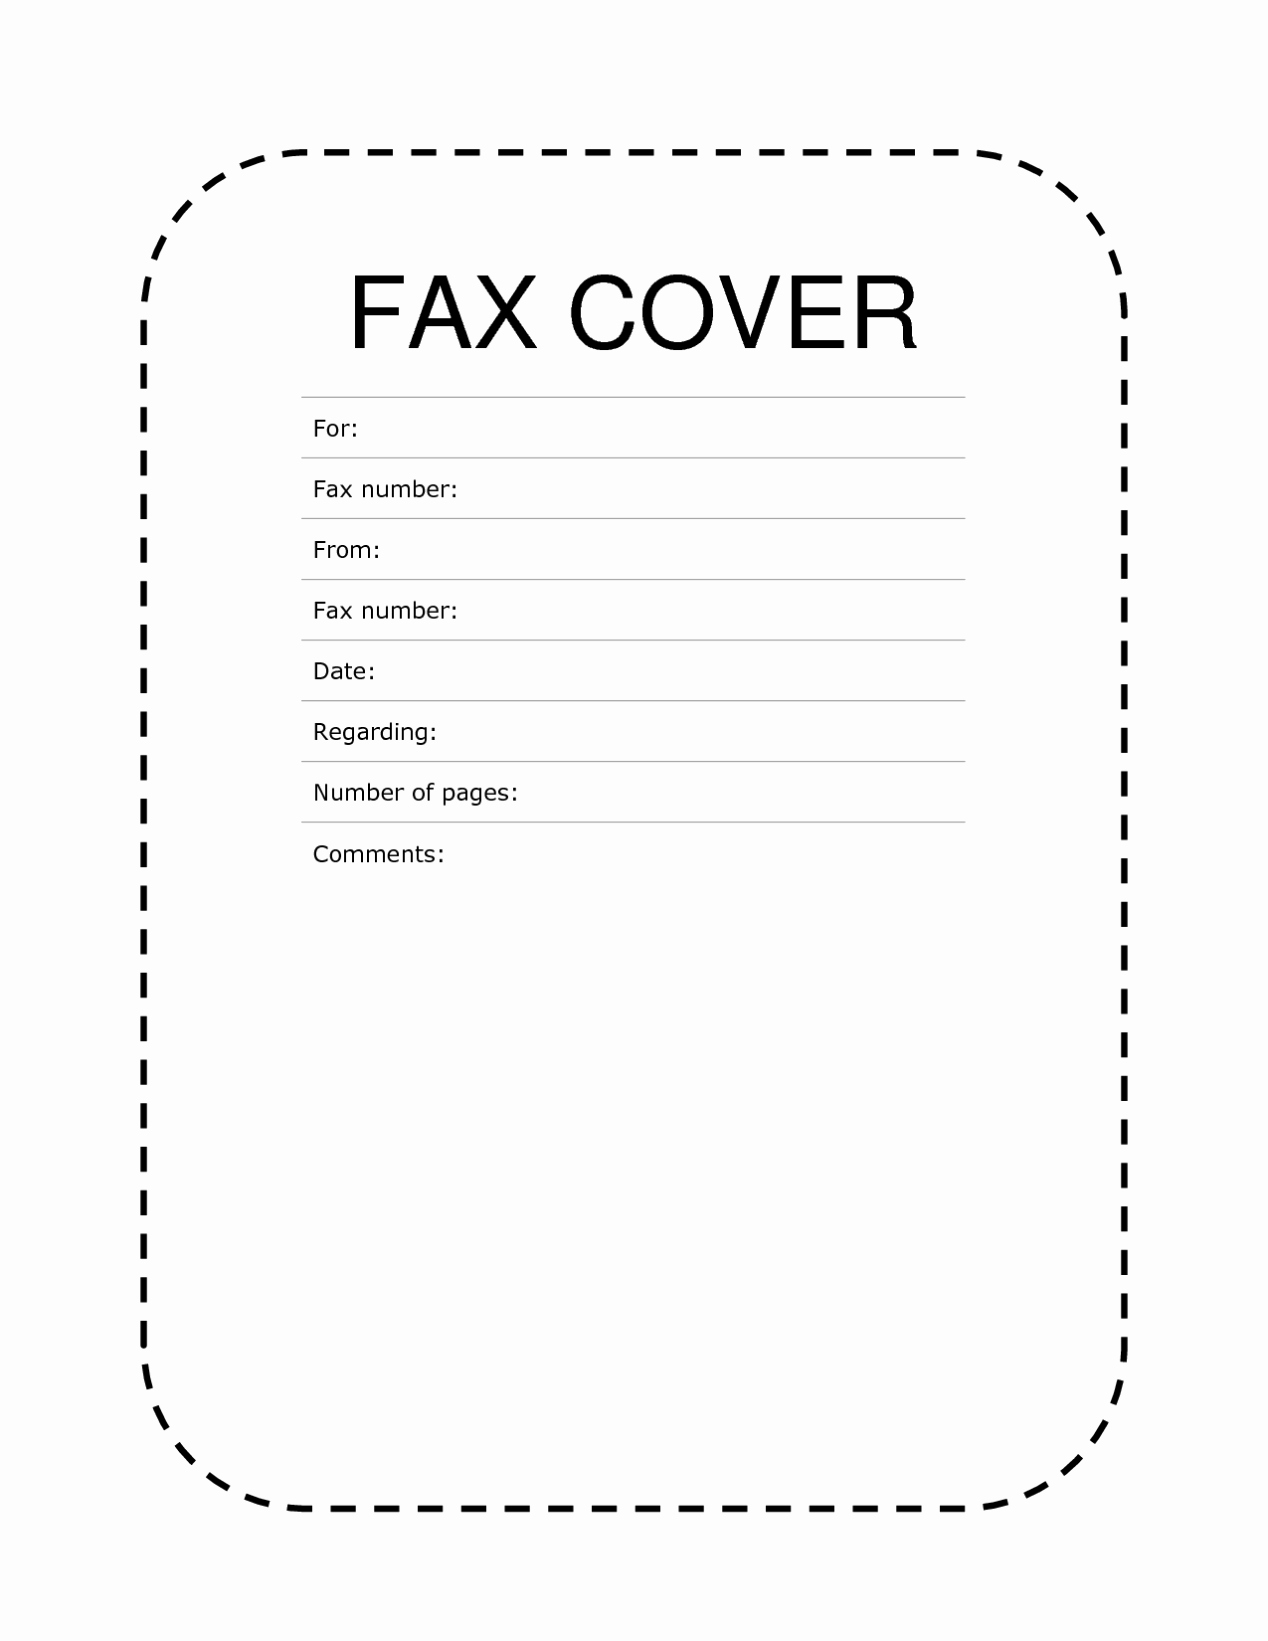 Word Template Fax Cover Sheet Lovely Free Printable Fax Cover Sheet Pdf Word Template Sample